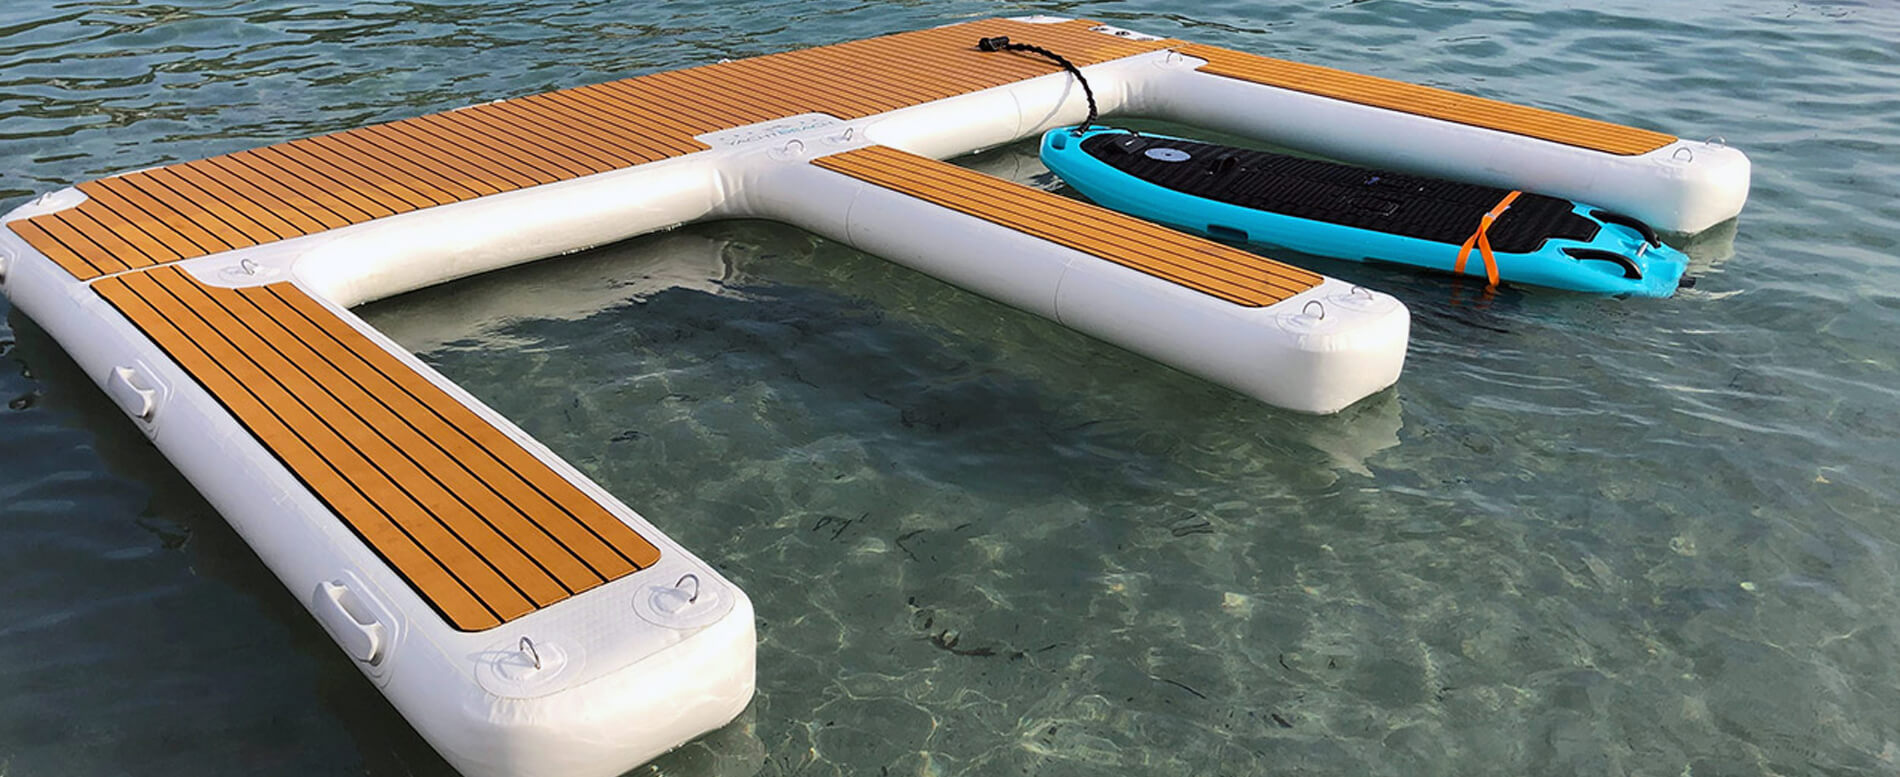 Paddle board on an inflatable dock